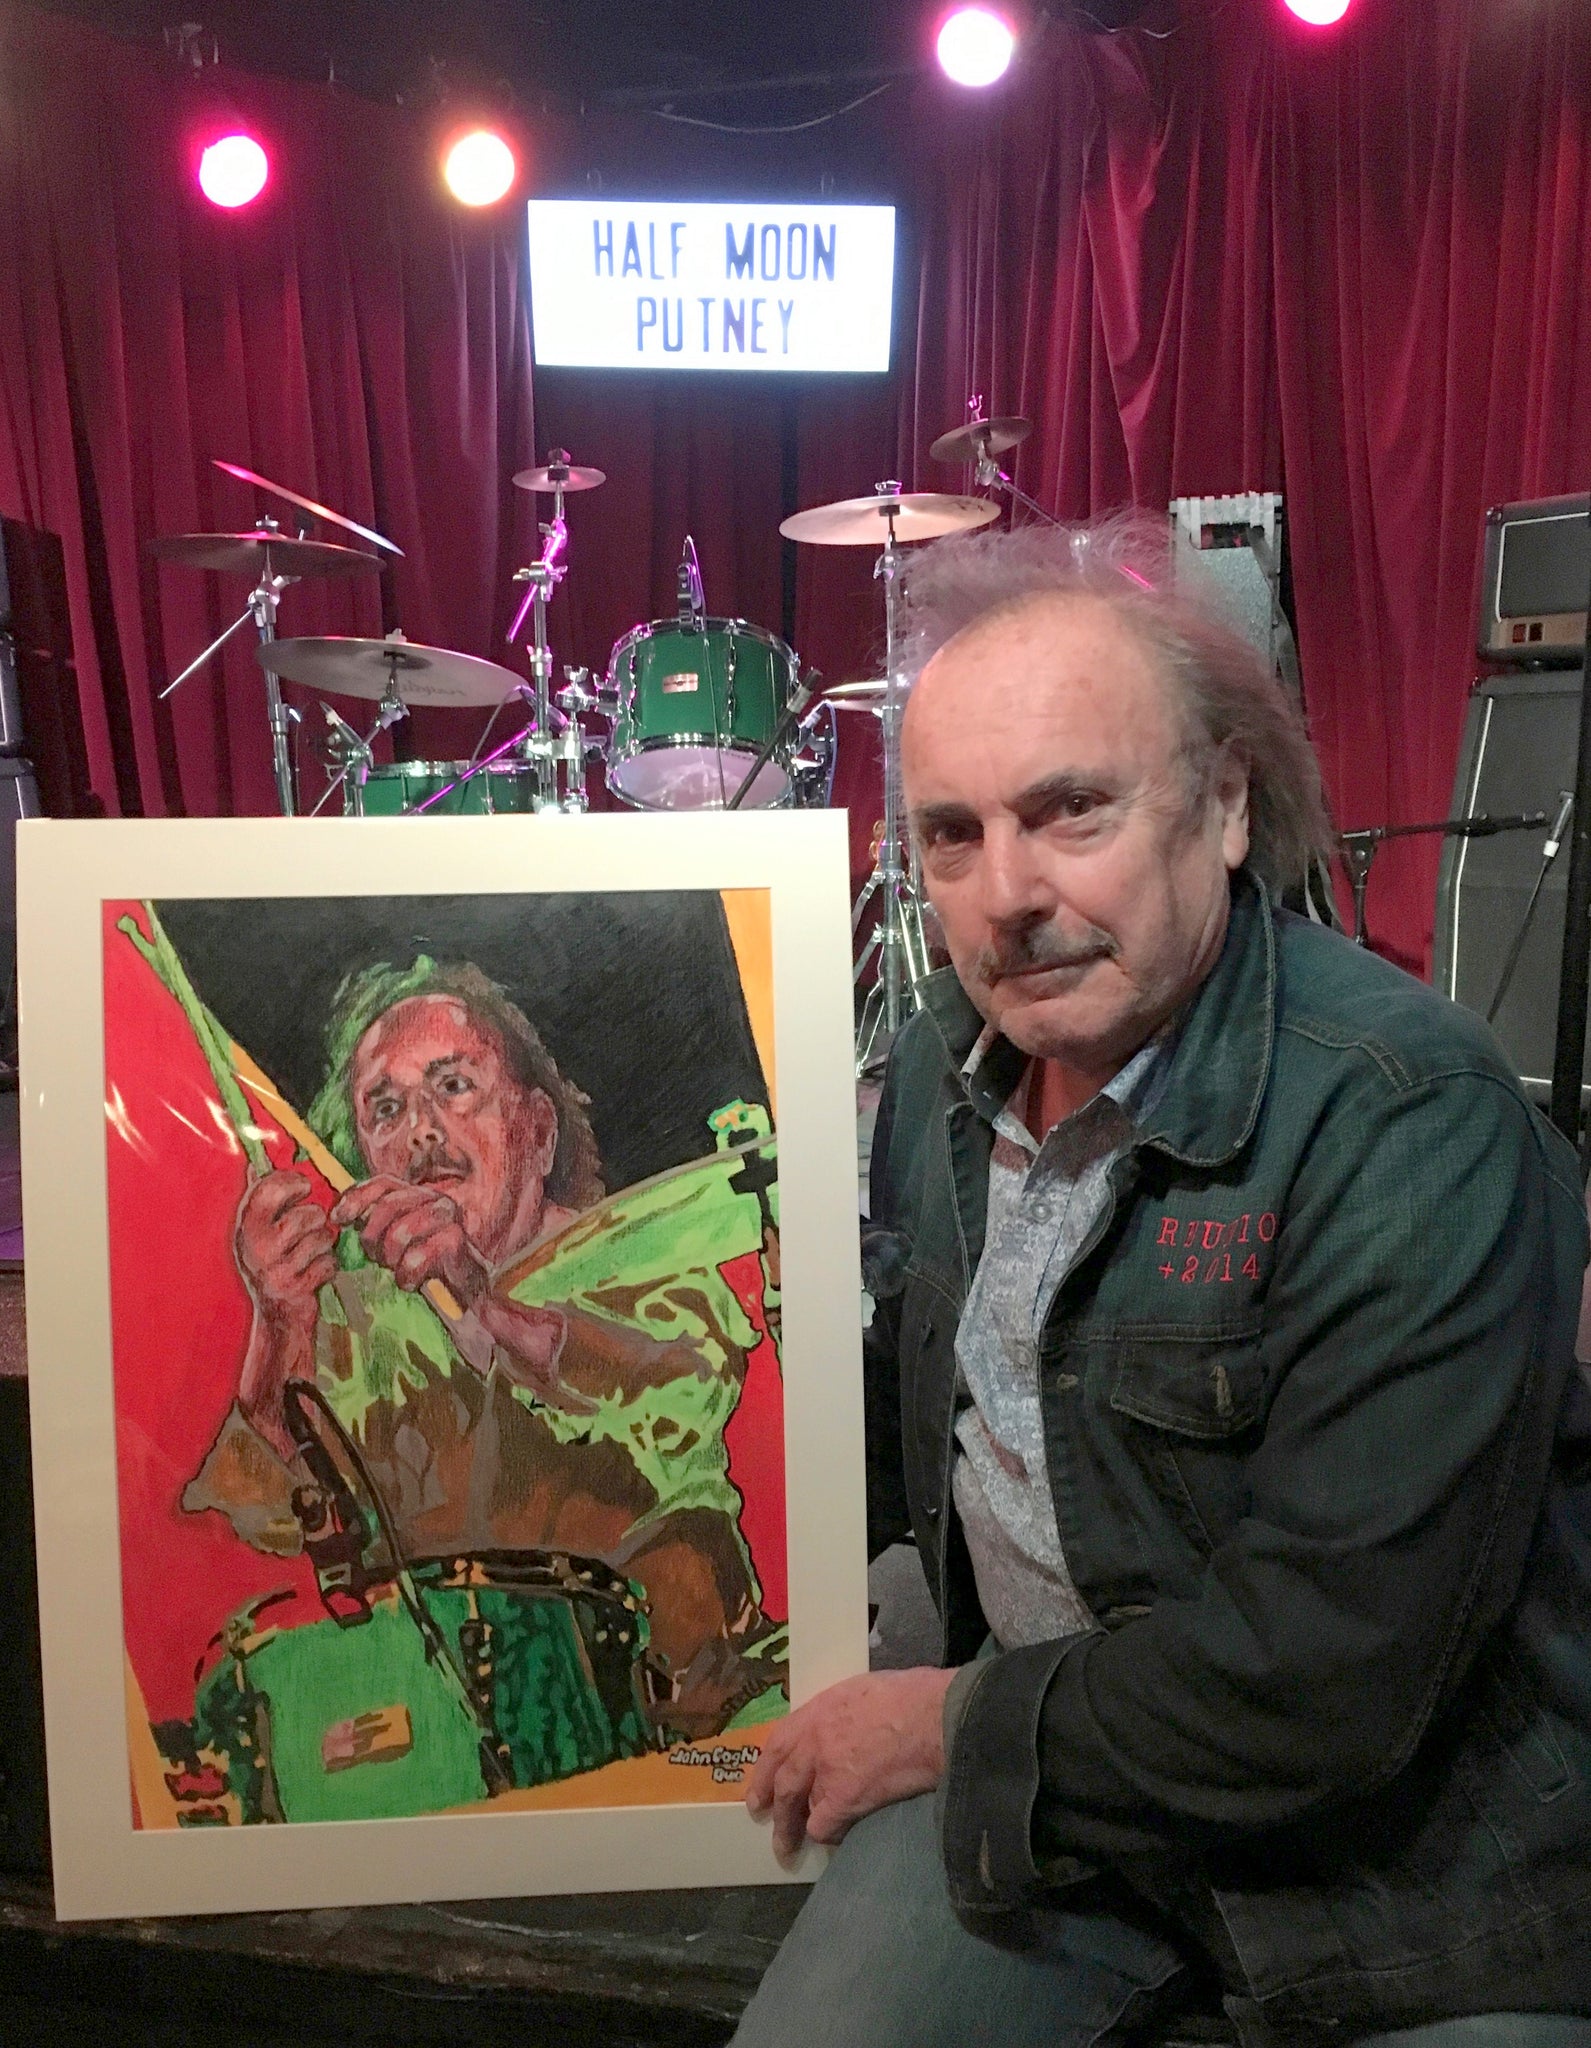 John Coghlan of Status Quo with Stella Tooth artist's mixed media on paper portrait of him